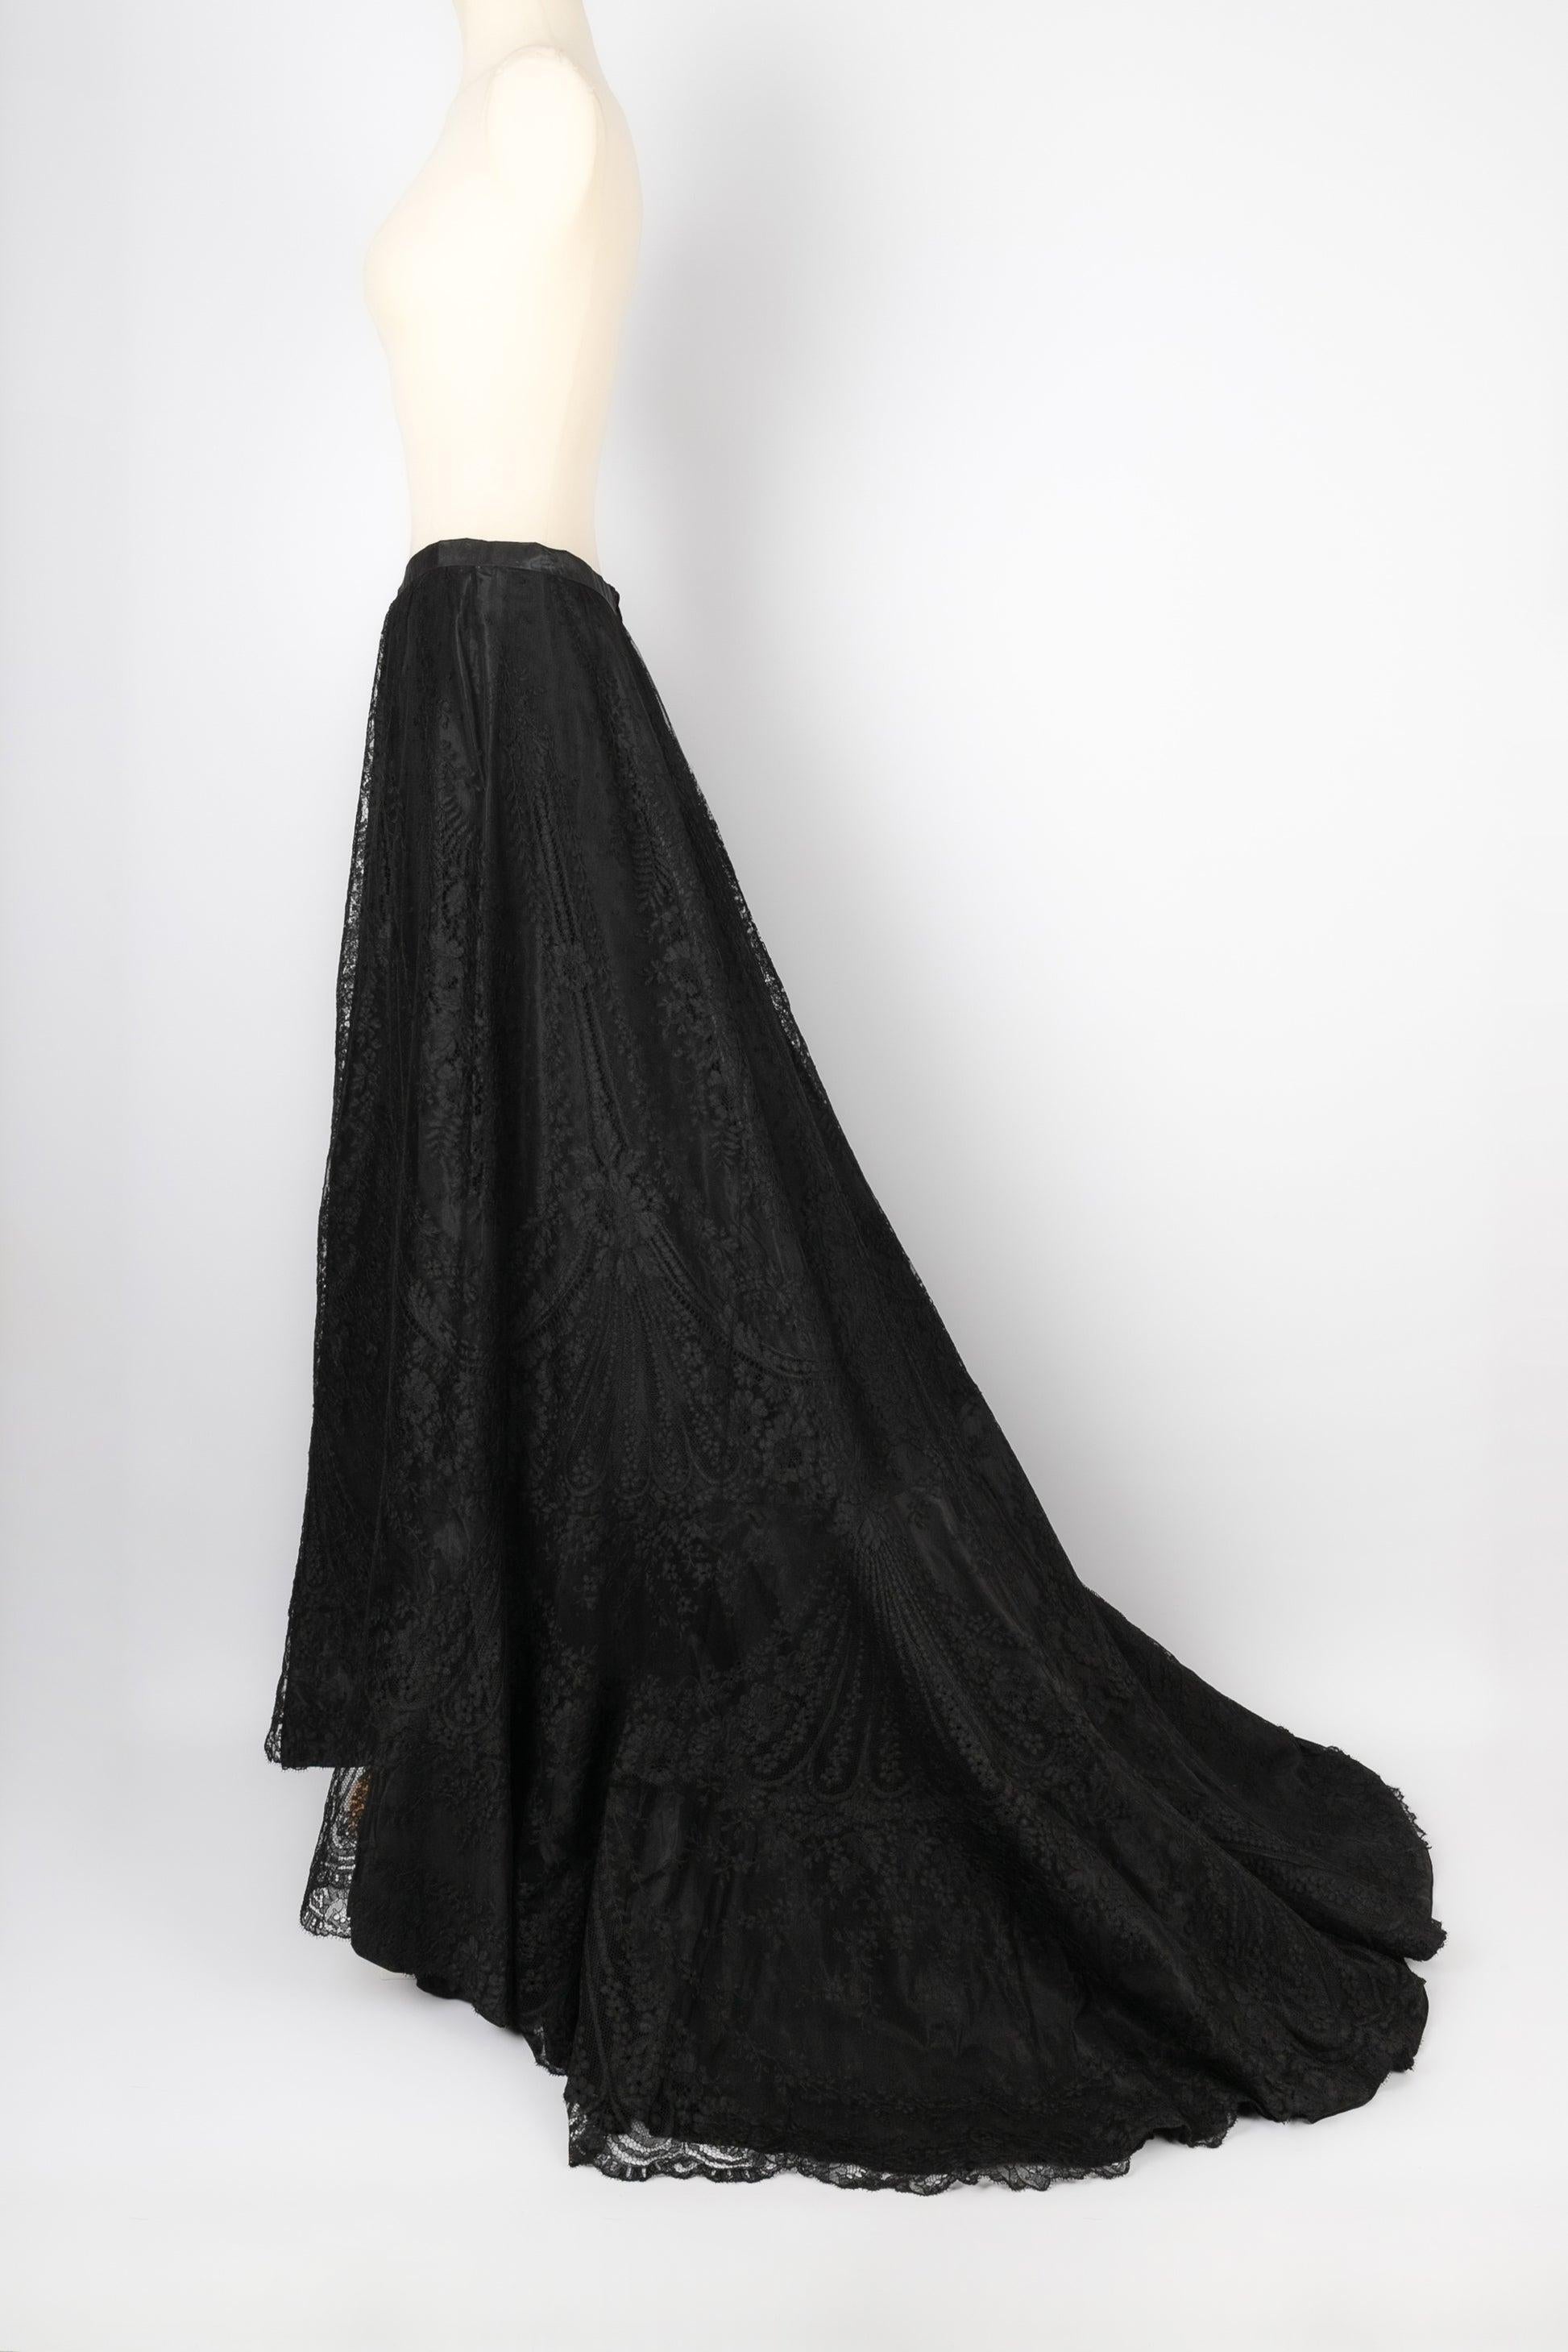 Anonyme - Long asymmetrical black lace skirt. No size label, it fits a 36FR.

Additional information:
Condition: Very good condition
Dimensions: Waist: 32 cm - Hips: 48 cm - Front length: 107 cm - Back length: 160 cm

Seller Reference: FJ109